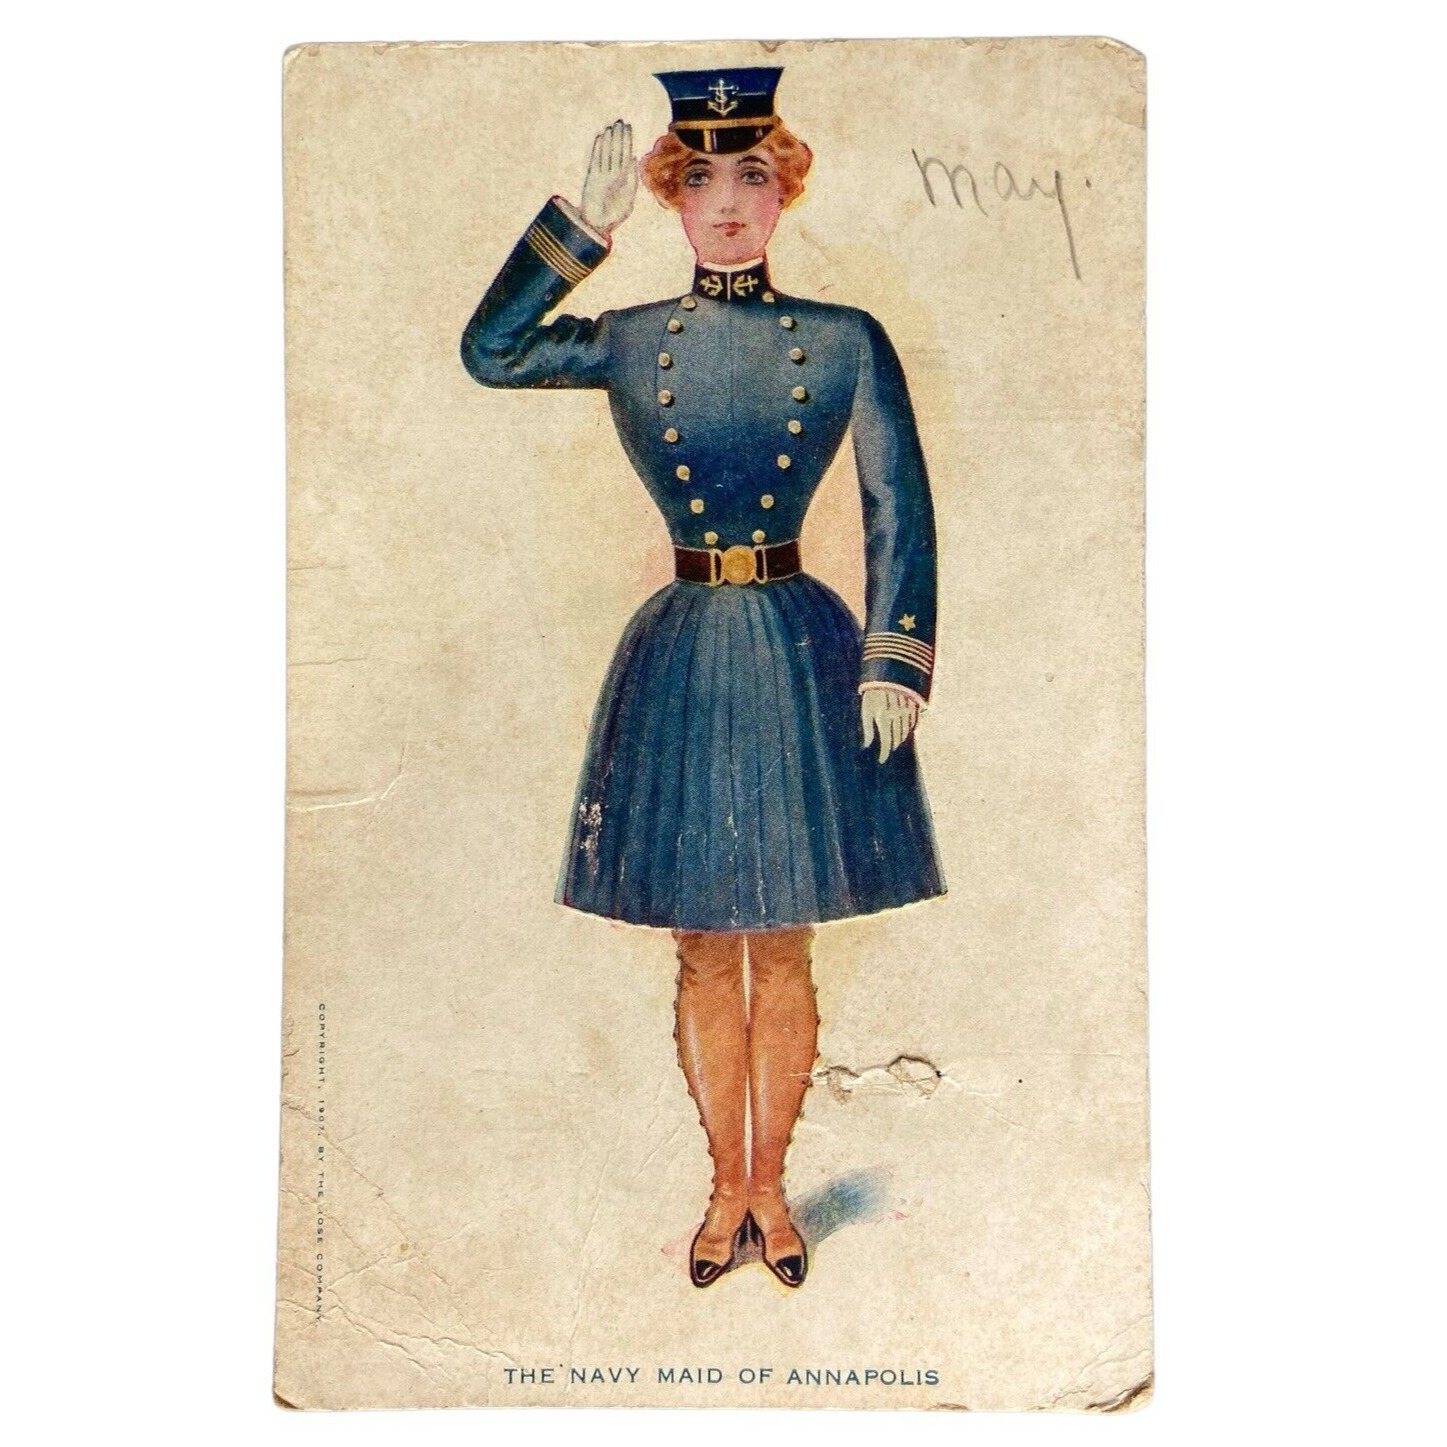 Postcard MD Annapolis The Navy Maid of Annapolis Woman Uniform The Rose Co 1907